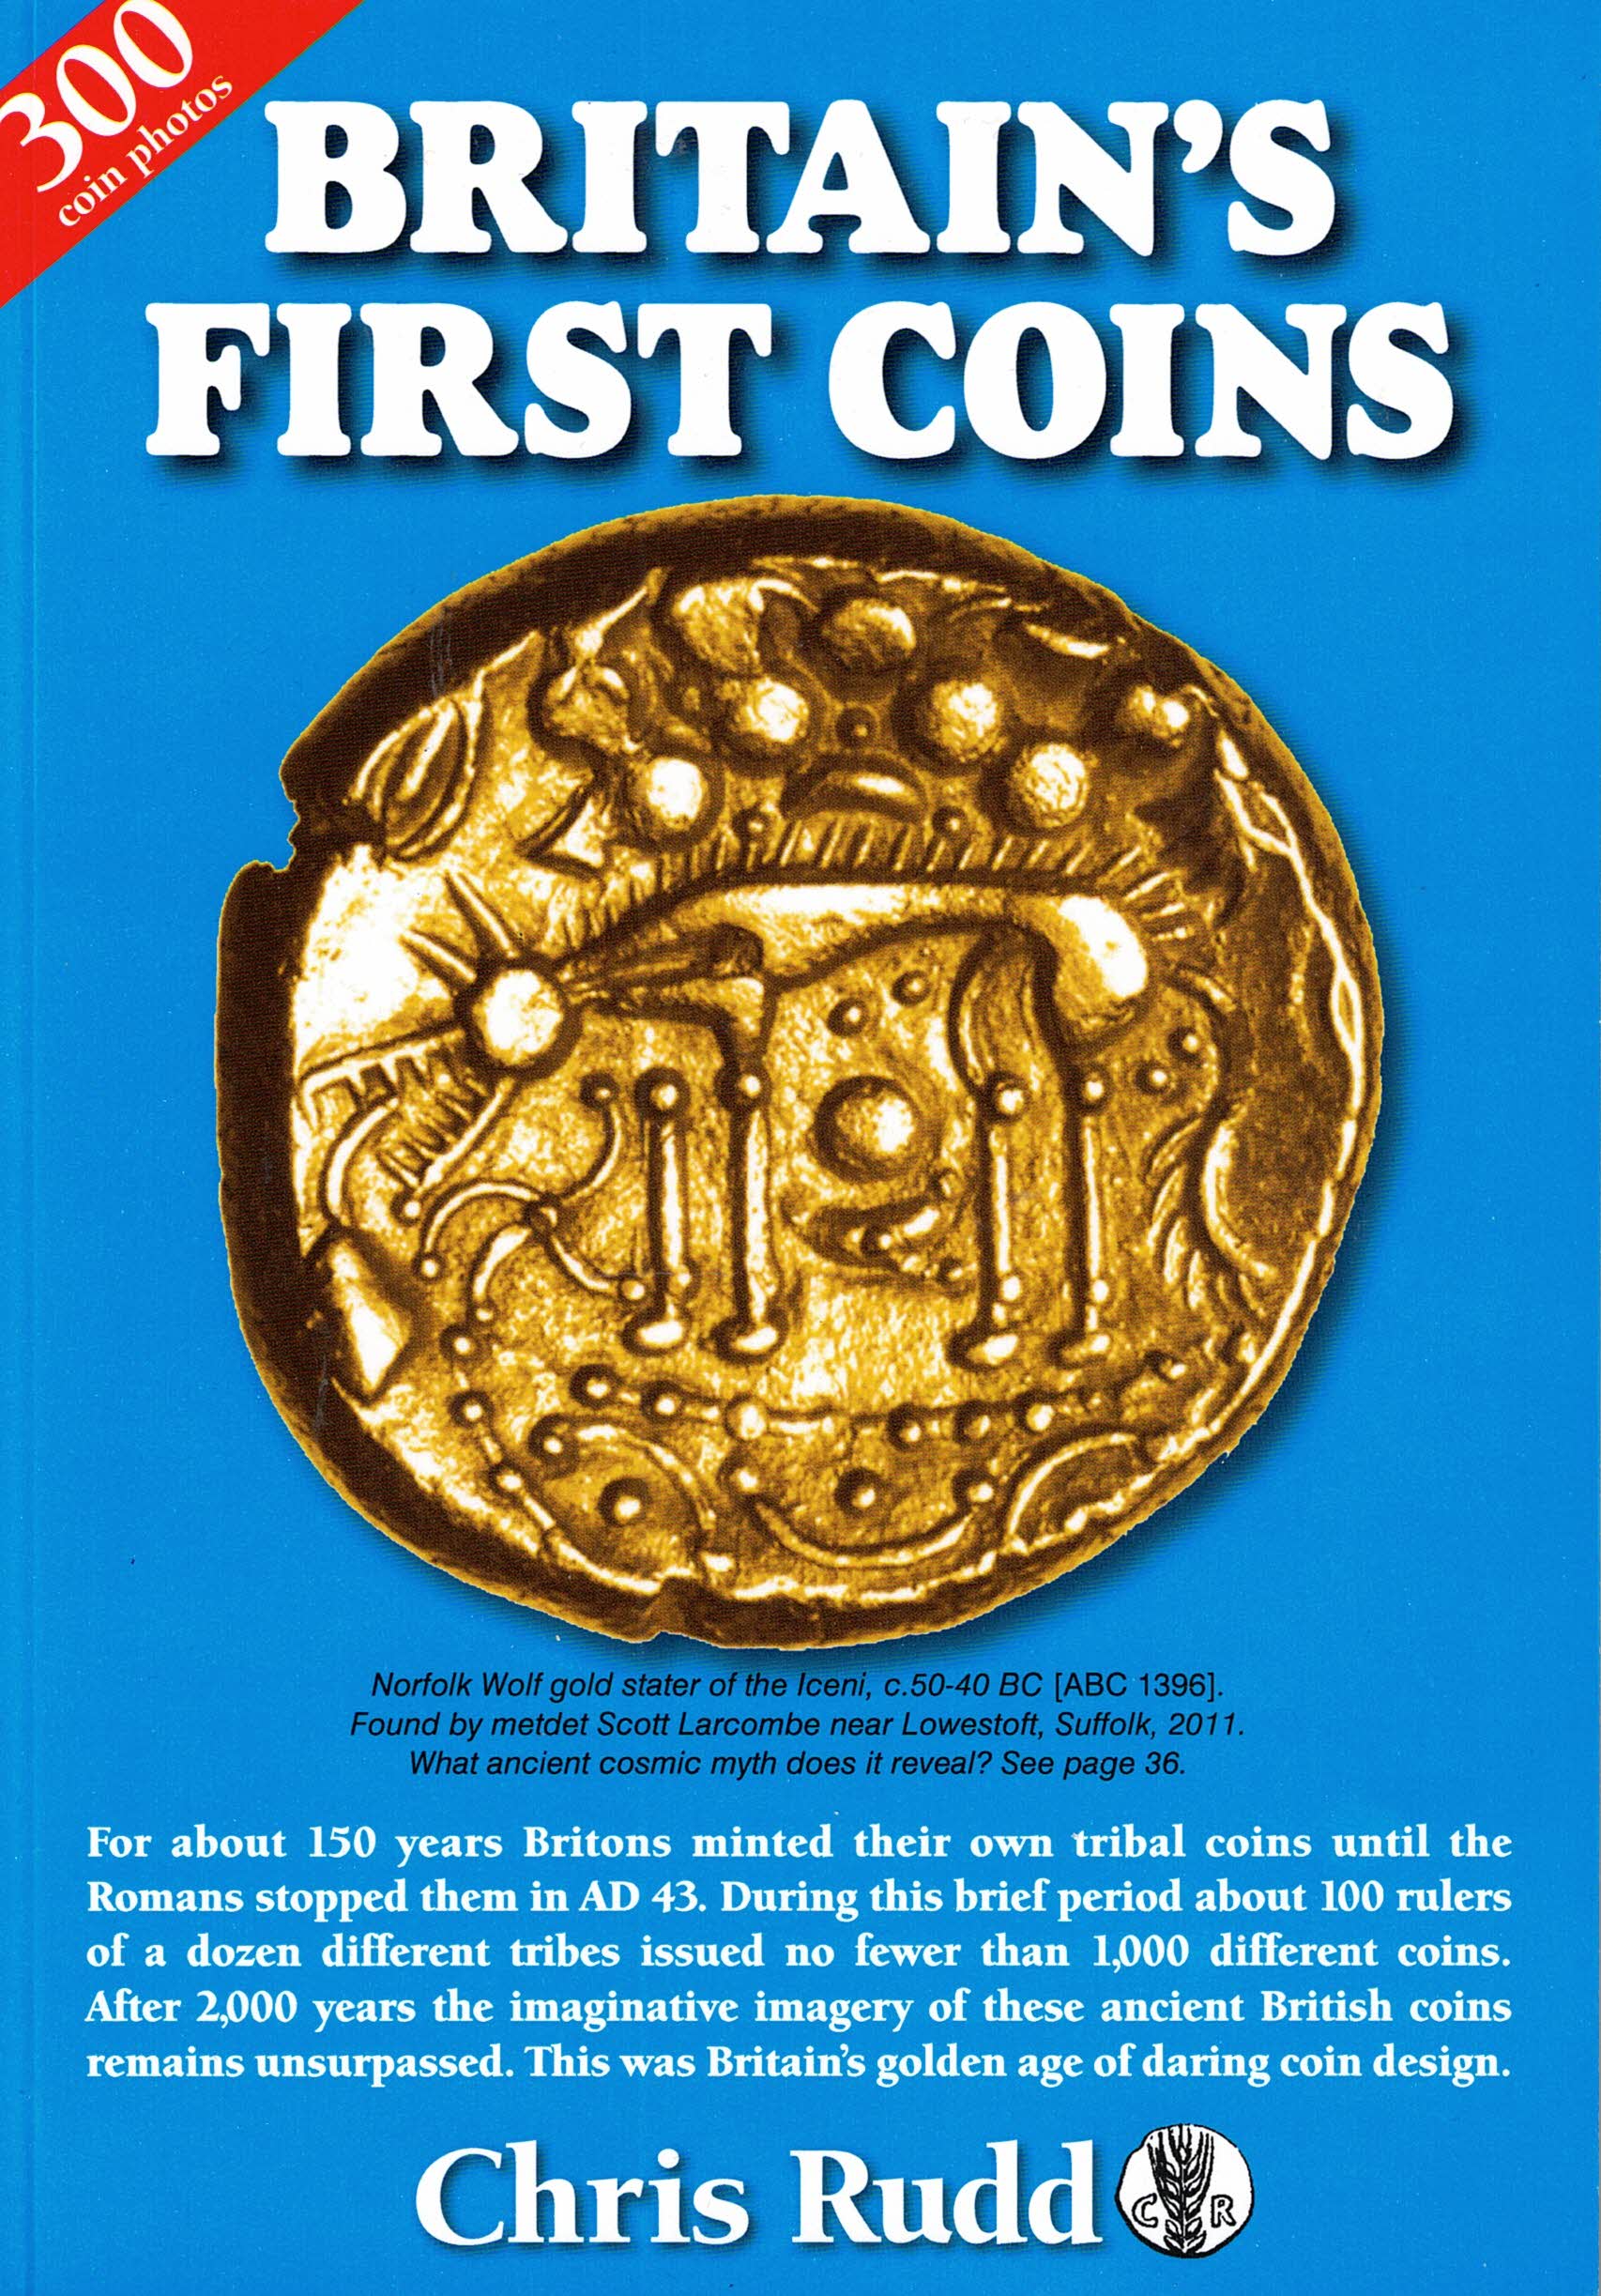 First coins. Tribe Coin.